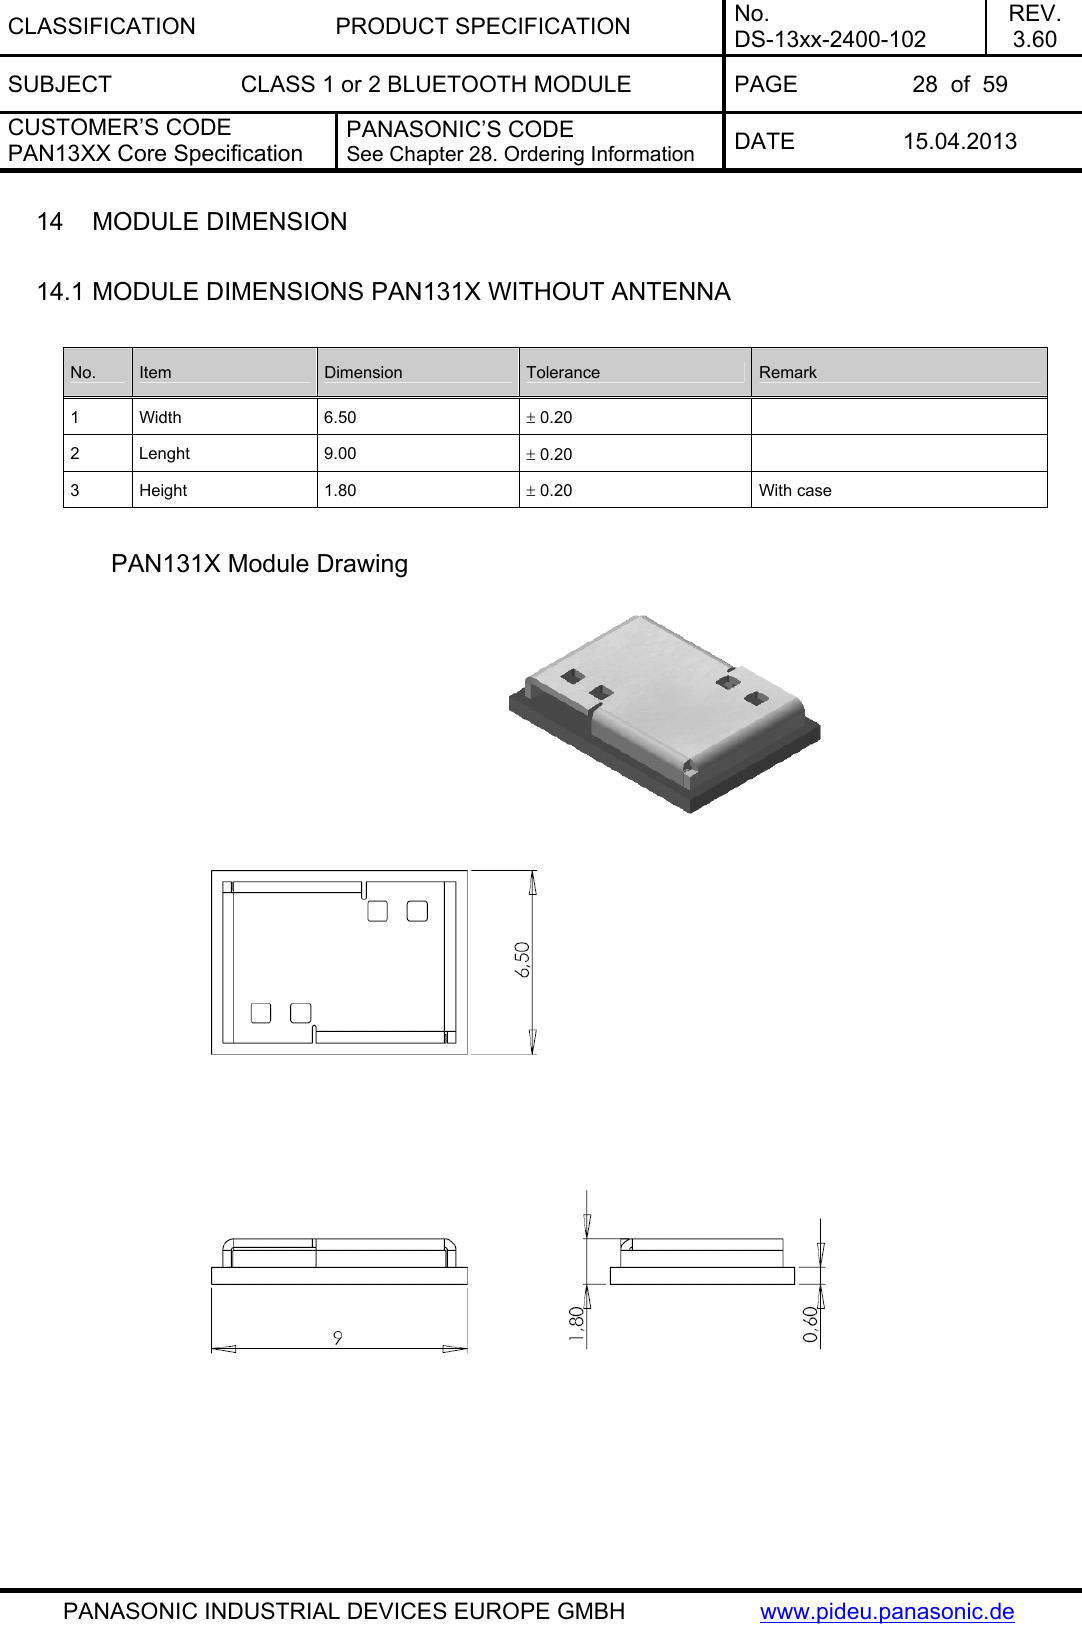 CLASSIFICATION PRODUCT SPECIFICATION No. DS-13xx-2400-102 REV. 3.60 SUBJECT  CLASS 1 or 2 BLUETOOTH MODULE  PAGE  28  of  59 CUSTOMER’S CODE PAN13XX Core Specification PANASONIC’S CODE See Chapter 28. Ordering Information  DATE 15.04.2013   PANASONIC INDUSTRIAL DEVICES EUROPE GMBH  www.pideu.panasonic.de 14  MODULE DIMENSION  14.1 MODULE DIMENSIONS PAN131X WITHOUT ANTENNA  No.  Item  Dimension  Tolerance  Remark 1 Width  6.50  ± 0.20   2 Lenght  9.00  ± 0.20   3 Height  1.80  ± 0.20  With case  PAN131X Module Drawing    